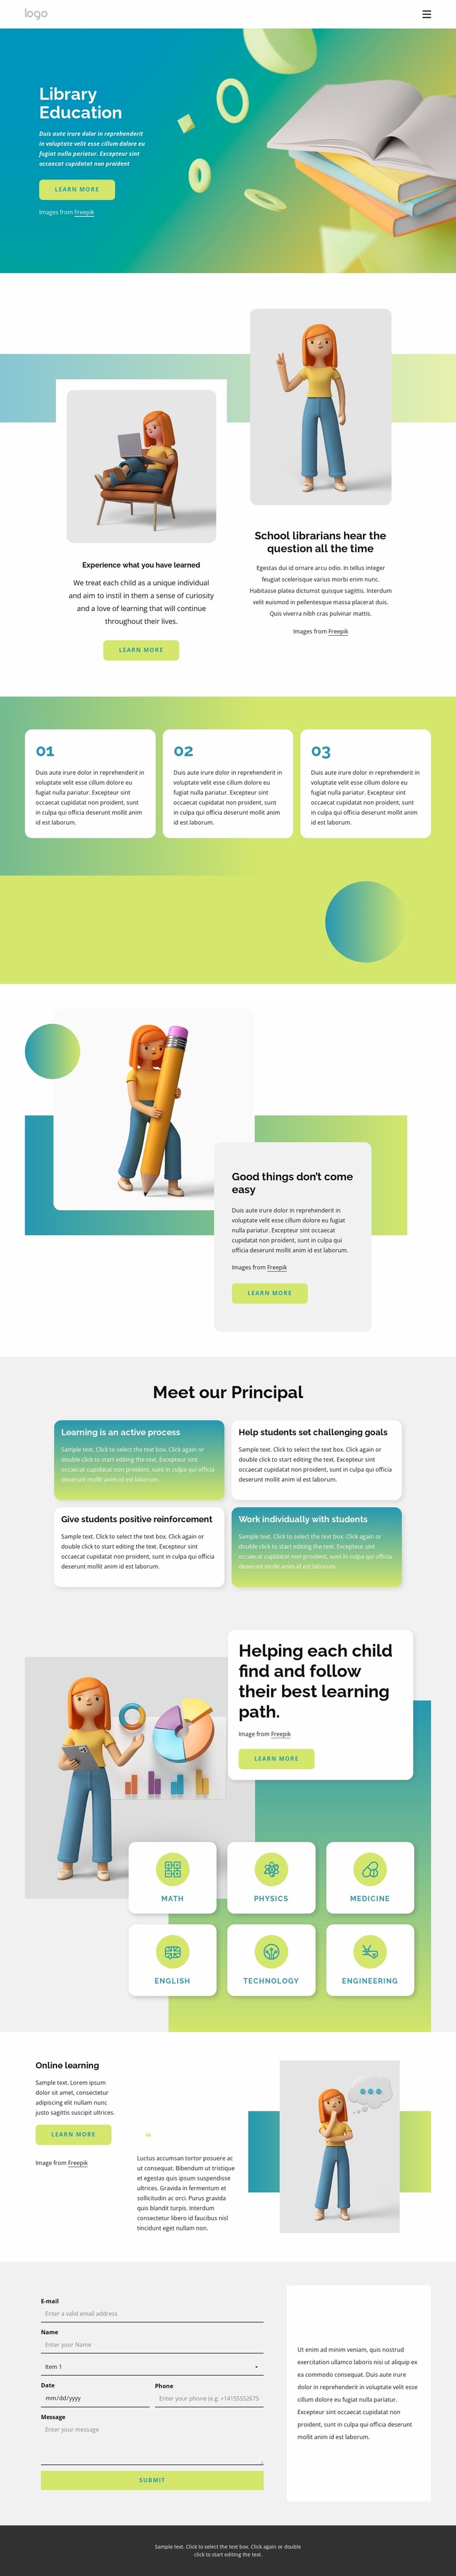 Education library Website Builder Templates